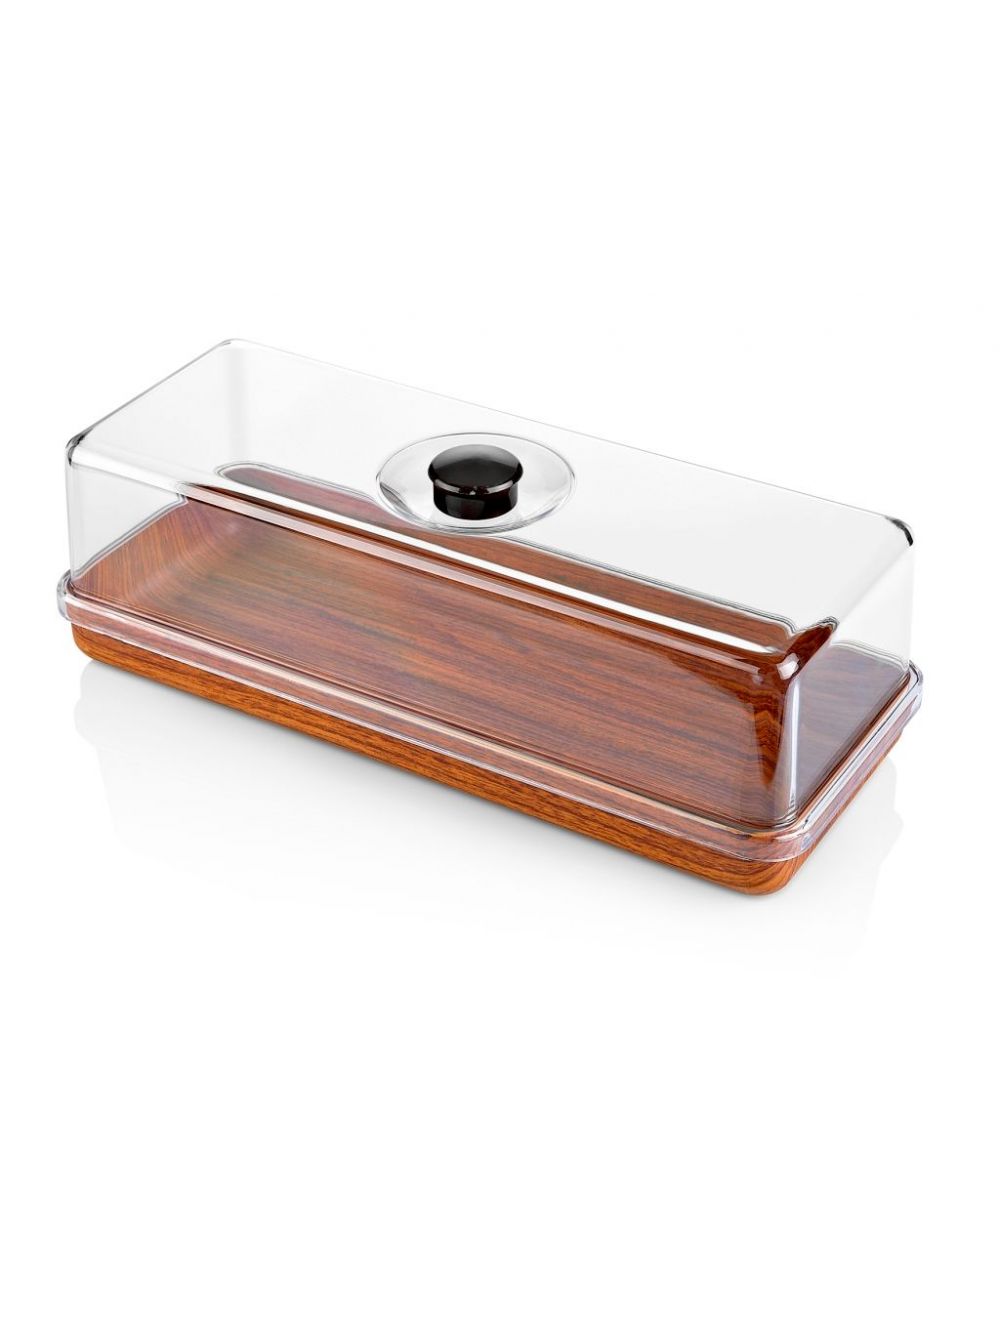 Evelin Rectangle Bread & Cake Serving Box Container With Lid